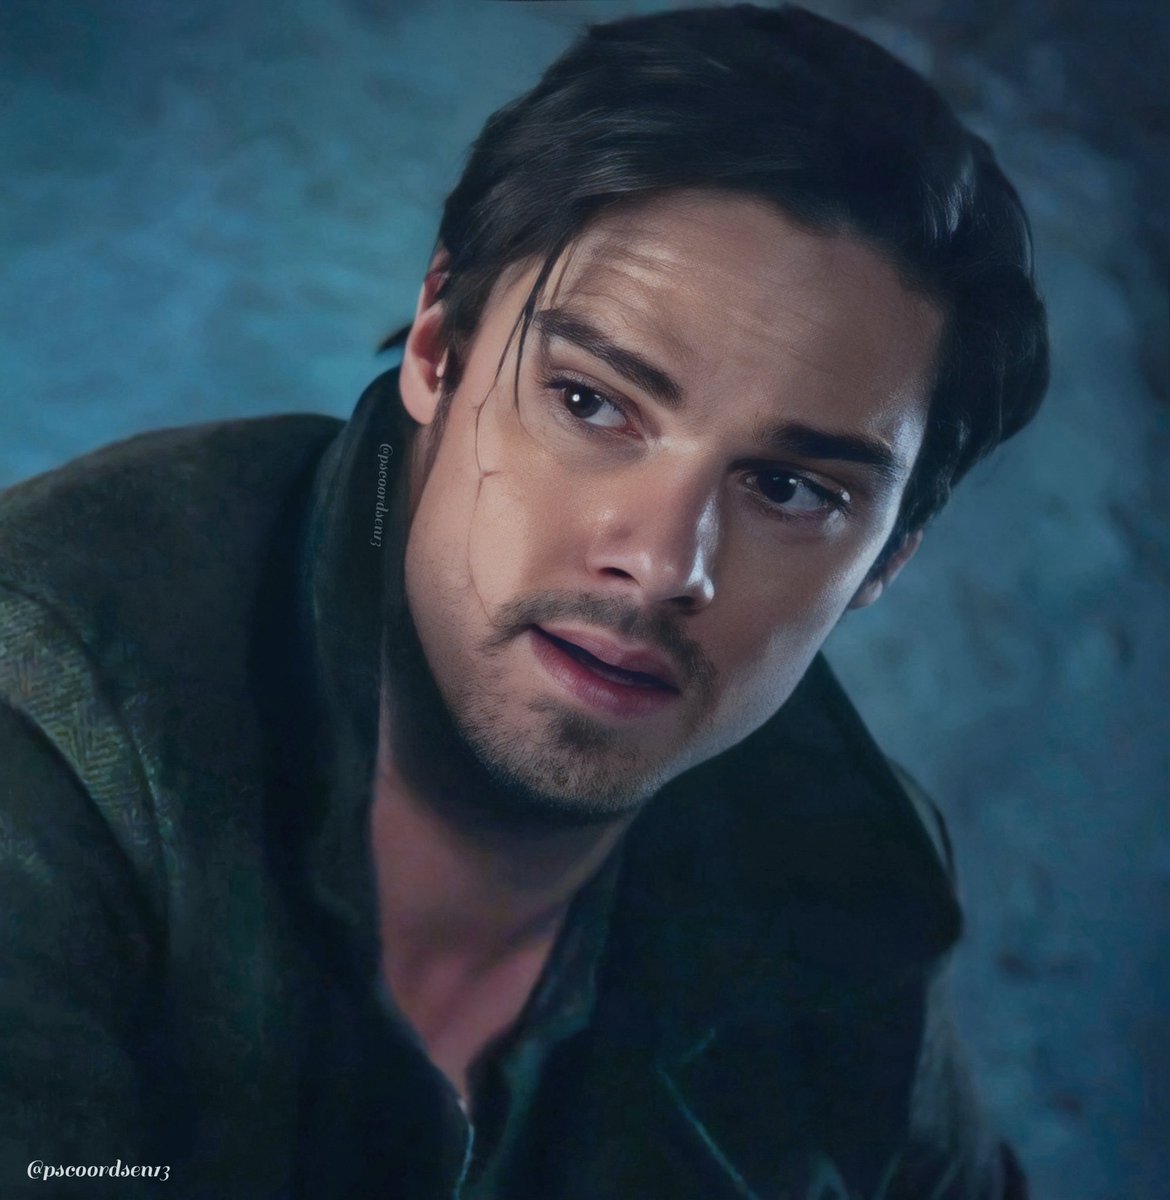 @tbrock623 @57Veronica Hello Tracey😘. Glad to hear you are having a nice week😊. I hope you all have a pleasant Sunday and a relaxing rest of the weekend.🥰🌹💕. 

#JustJayRyan #EverydayGorgeous 

#BatB  #BeautyAndTheBeast